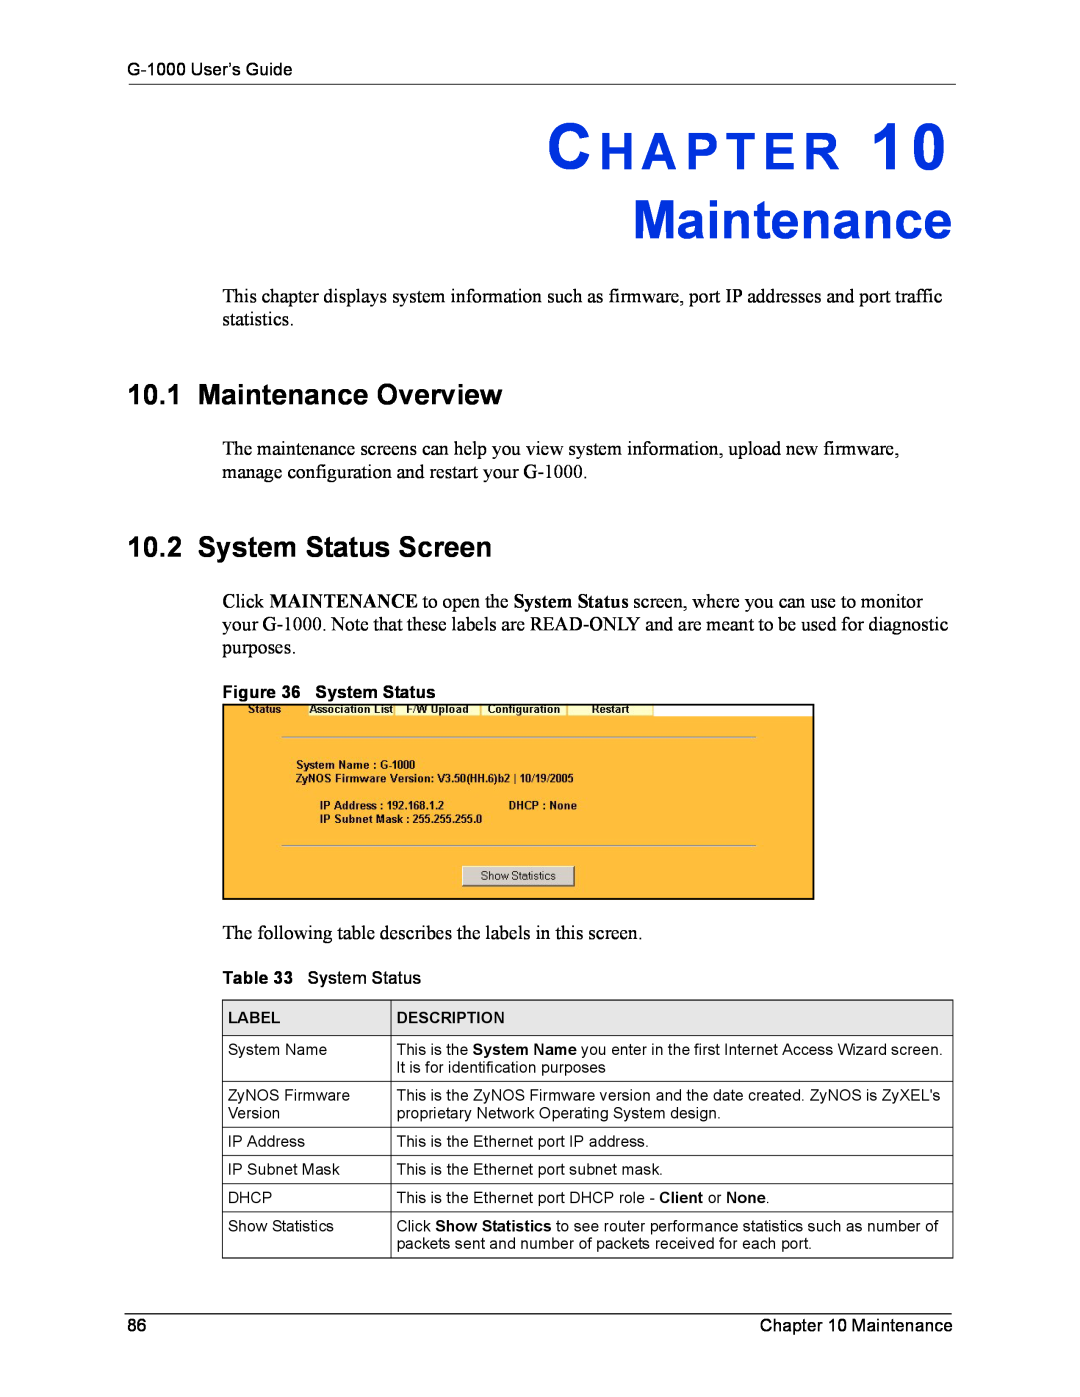 ZyXEL Communications G-1000 manual Maintenance Overview, System Status Screen, Ch A P T E R 